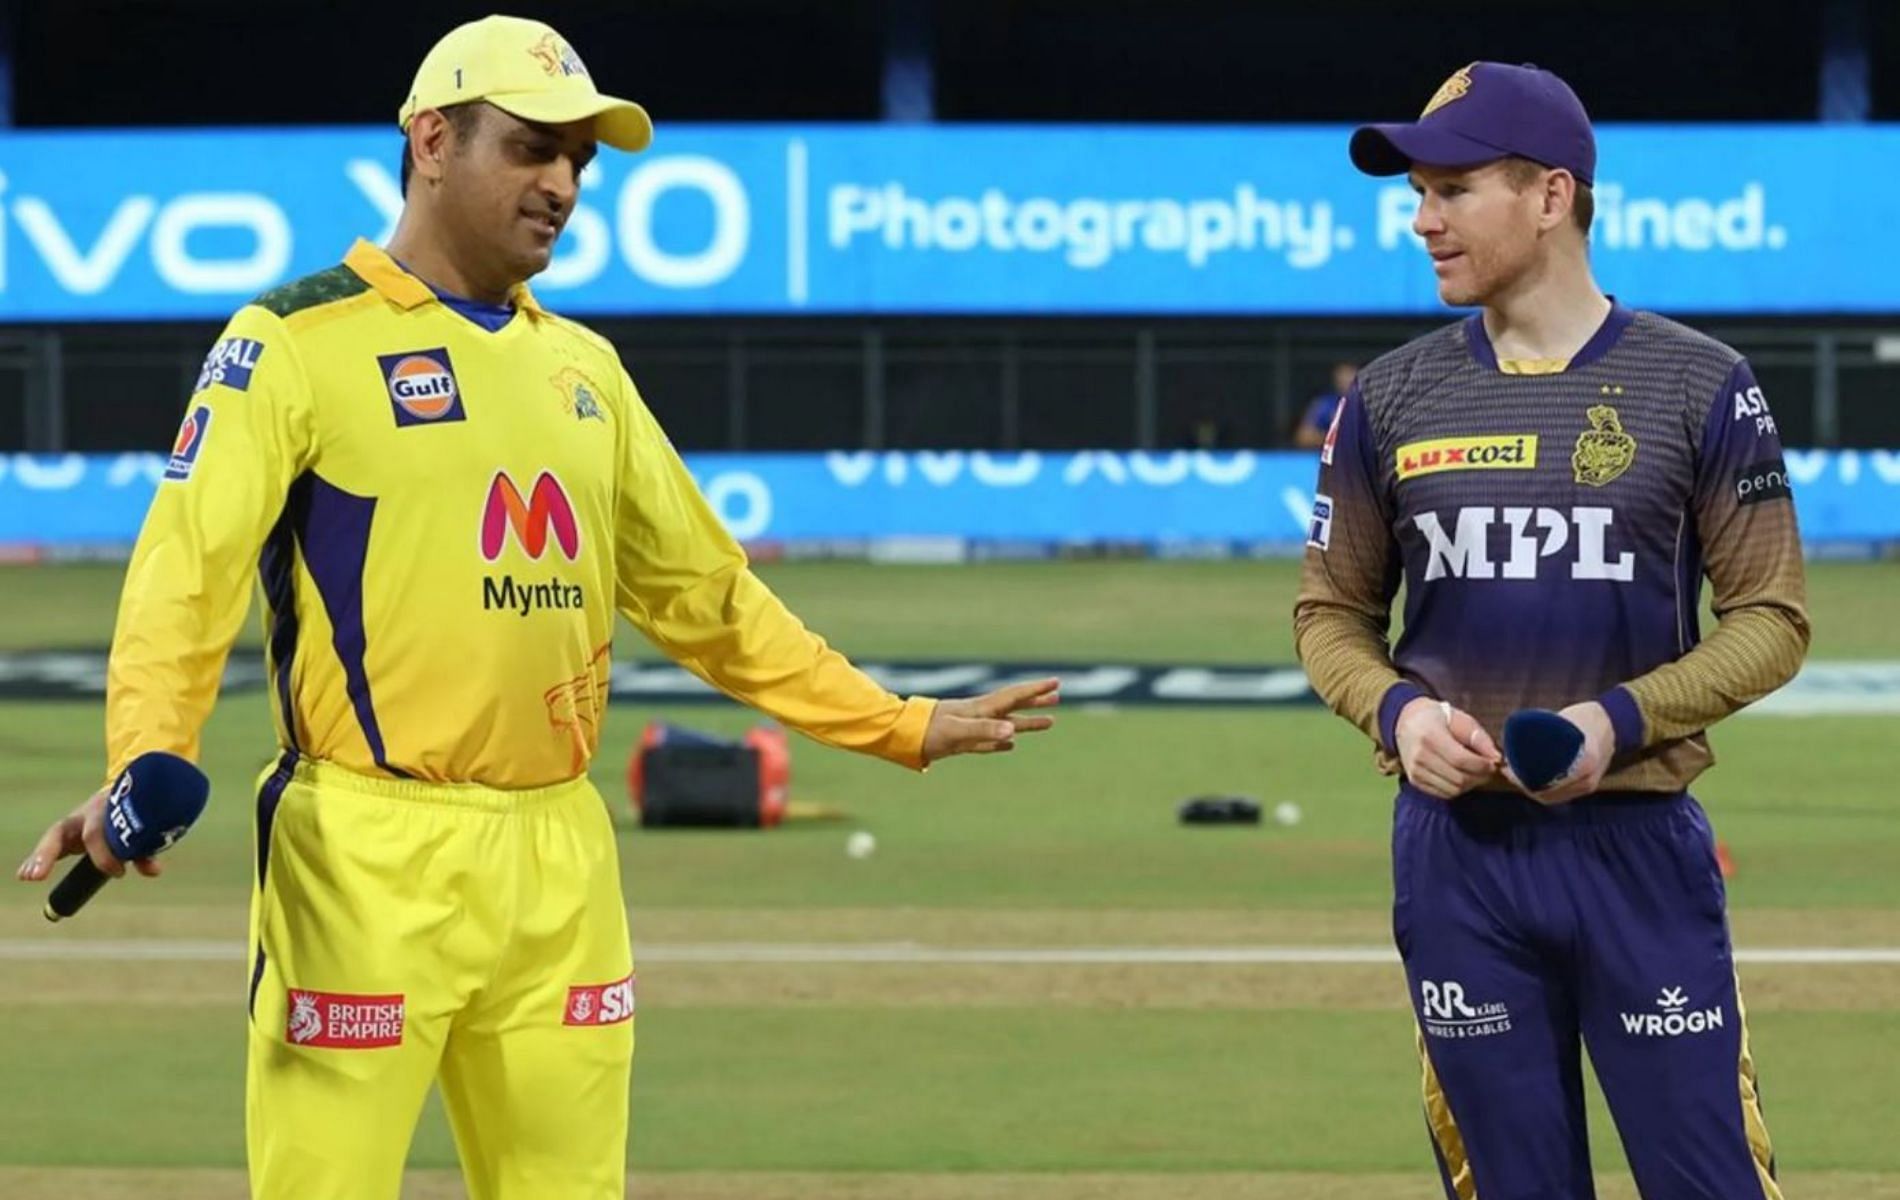 CSK and KKR will lock horns in the IPL 2021 final on Friday